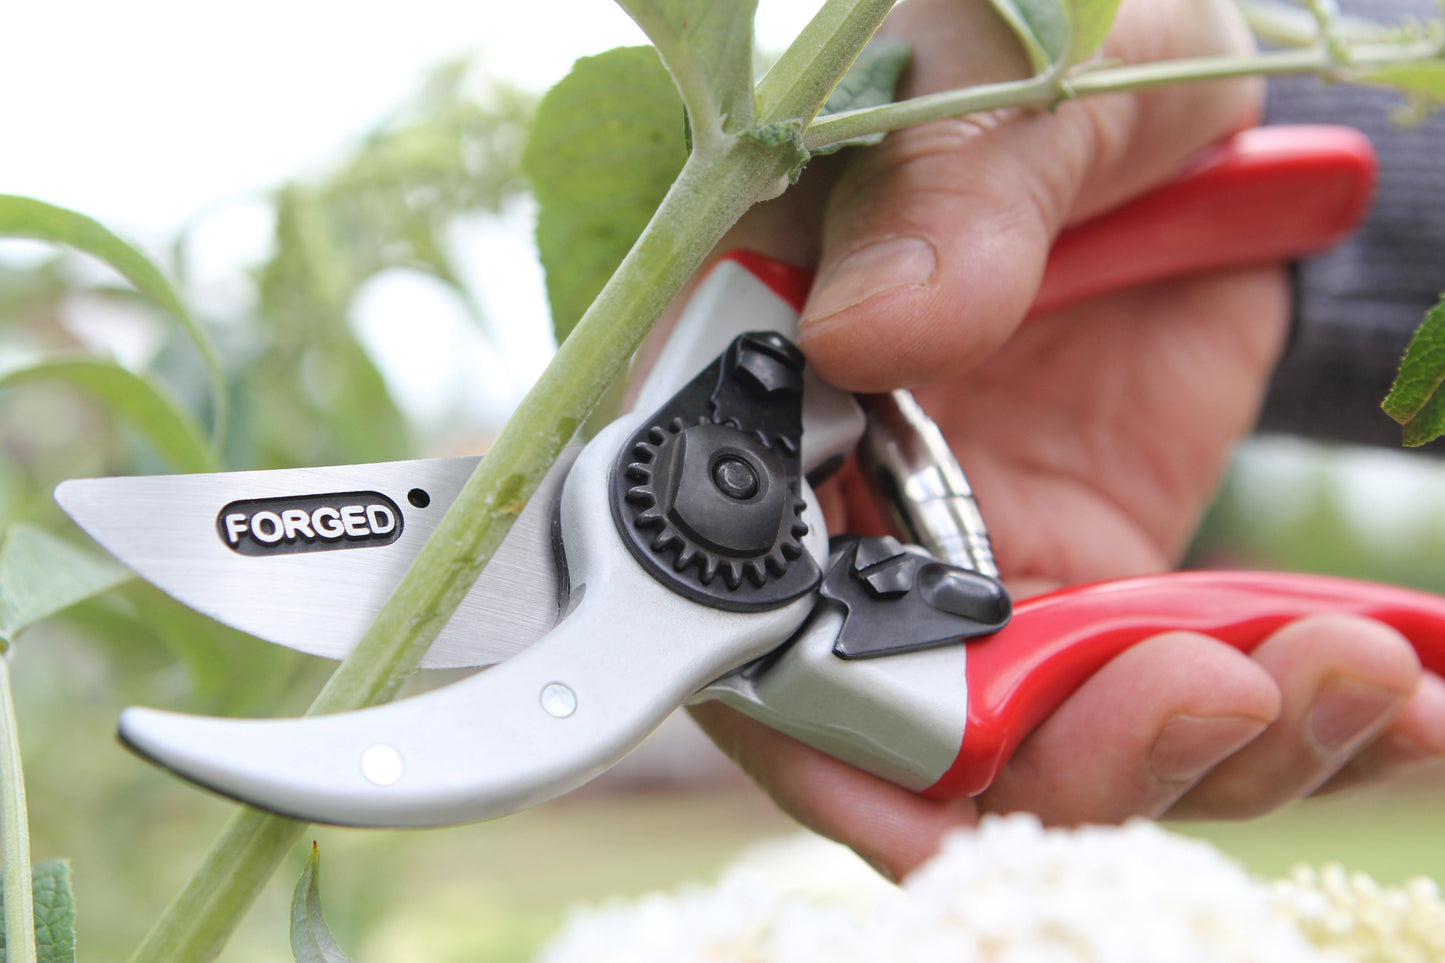 Darlac DP1036 Expert Drop Forged Pruner UK SHIPPING ONLY